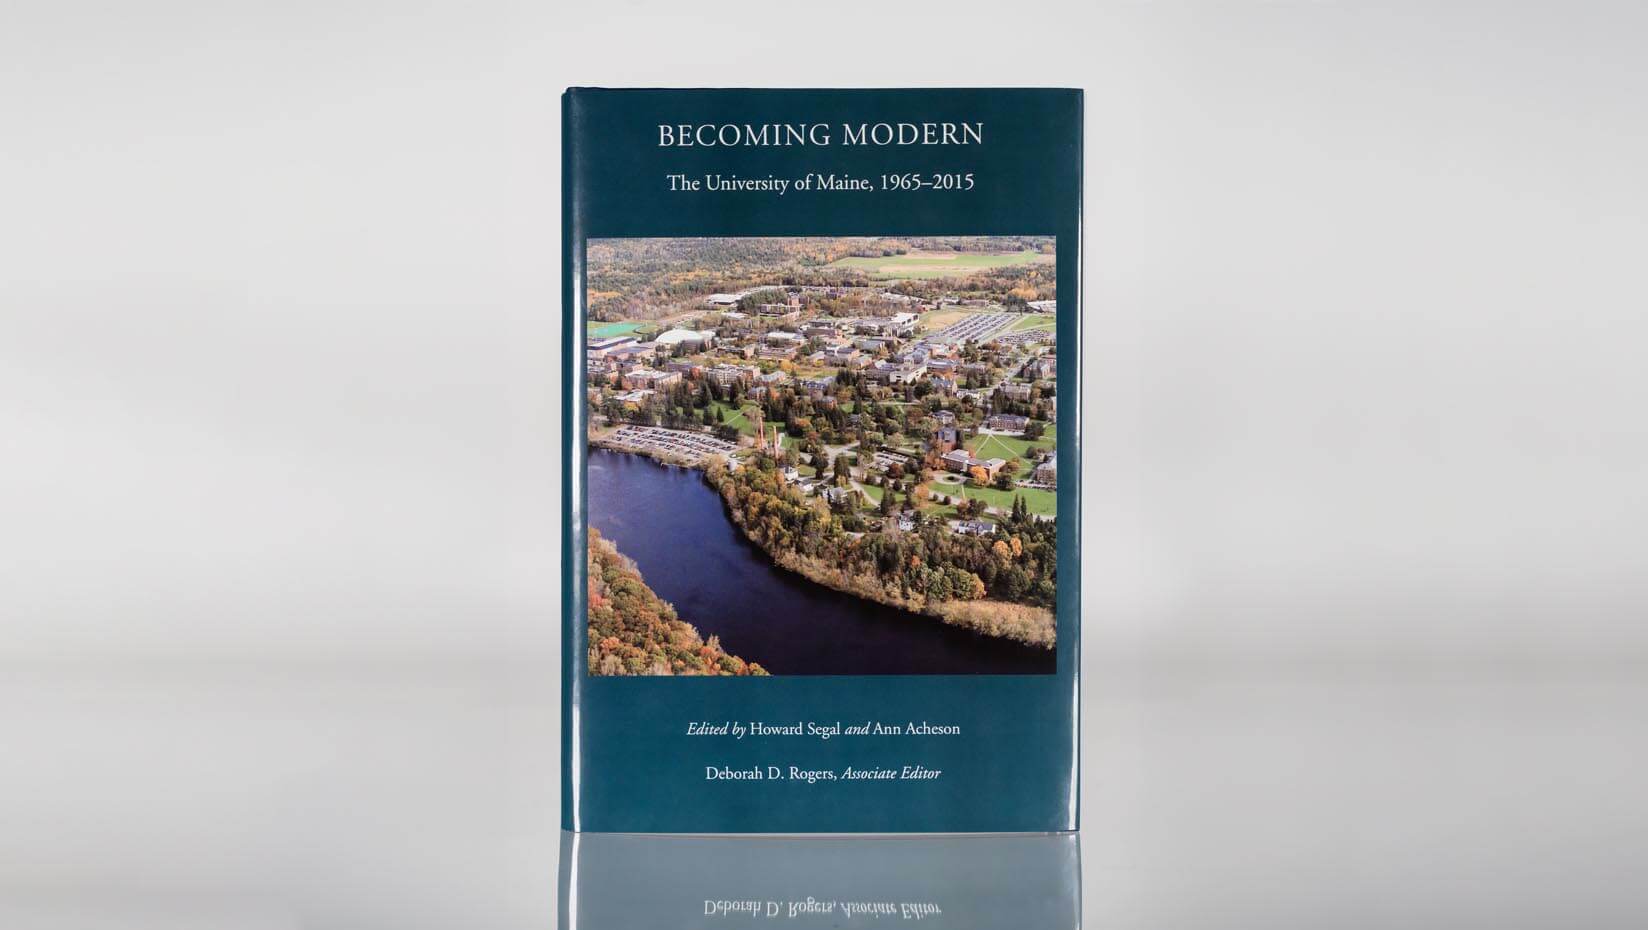 featured image for New book details UMaine’s journey of ‘Becoming Modern’ 